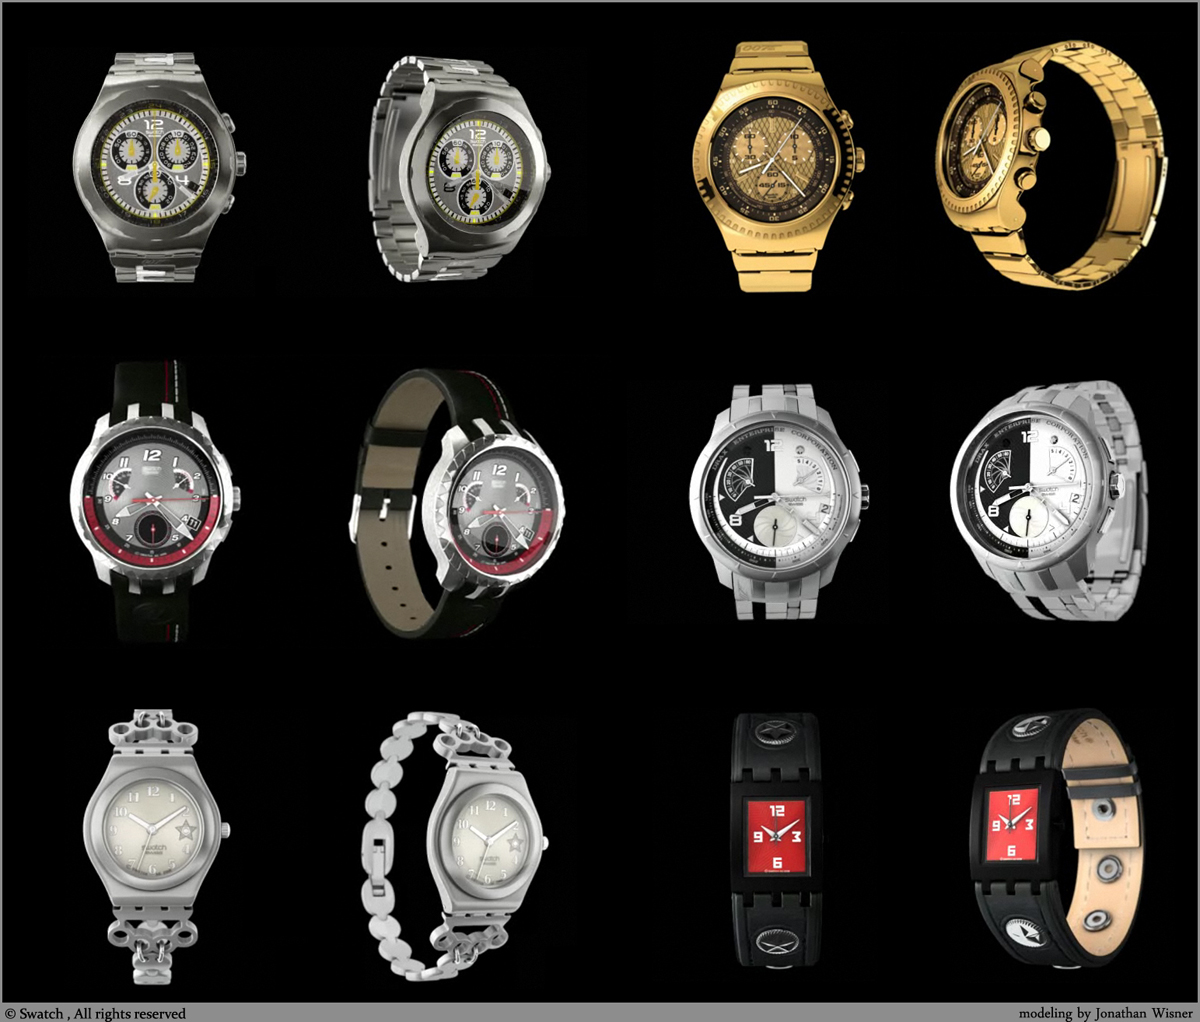 official Swatch 007 collection by B0R on DeviantArt